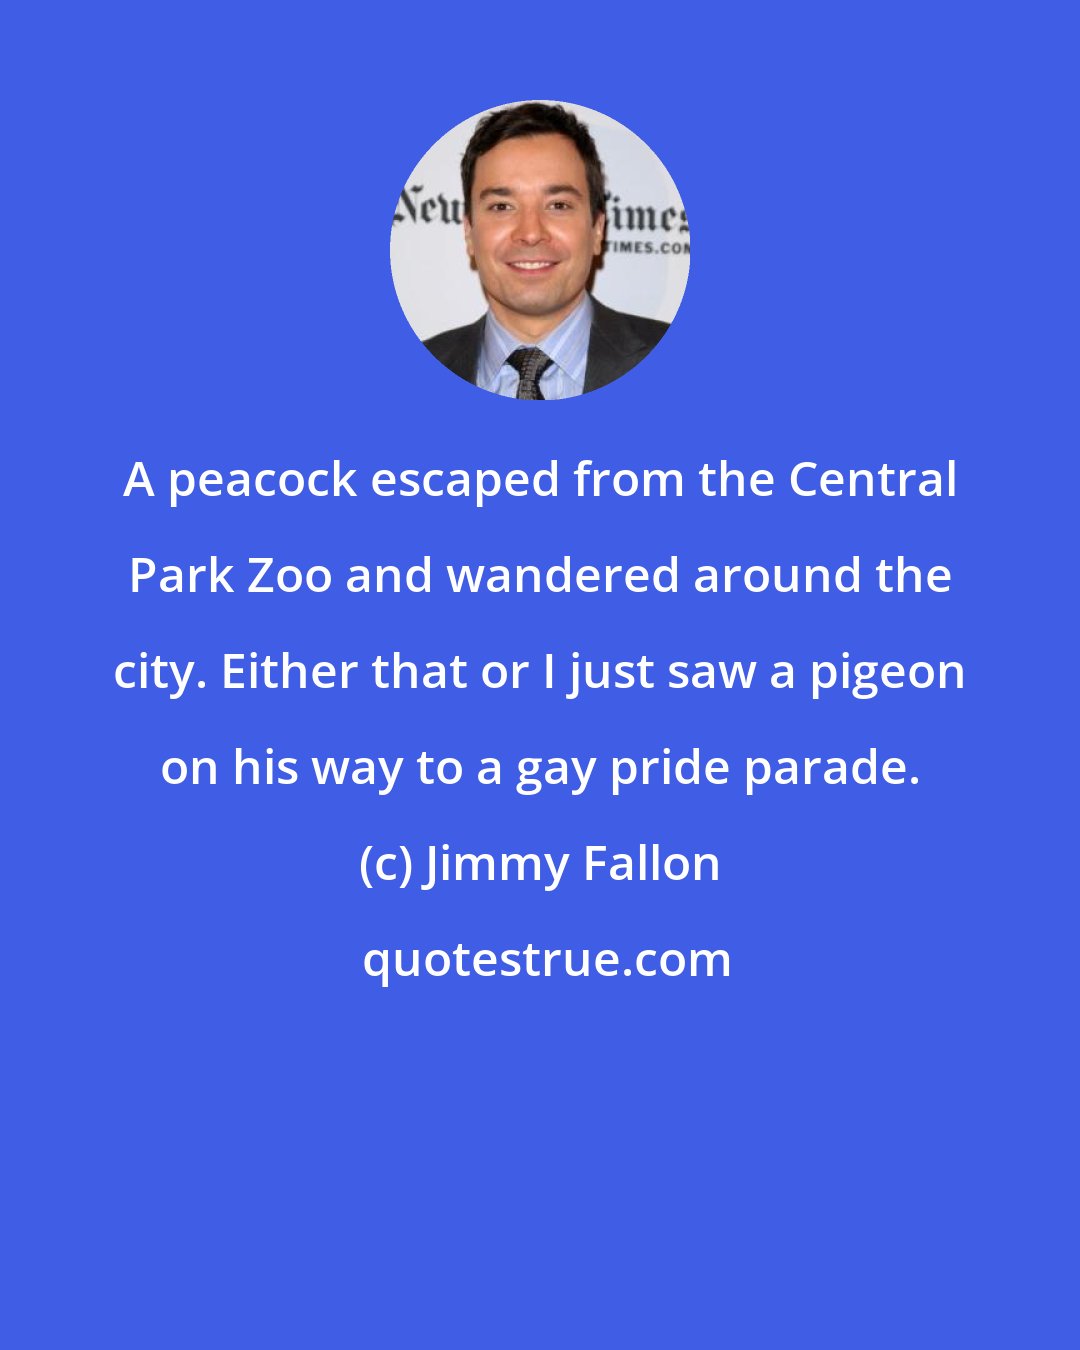 Jimmy Fallon: A peacock escaped from the Central Park Zoo and wandered around the city. Either that or I just saw a pigeon on his way to a gay pride parade.